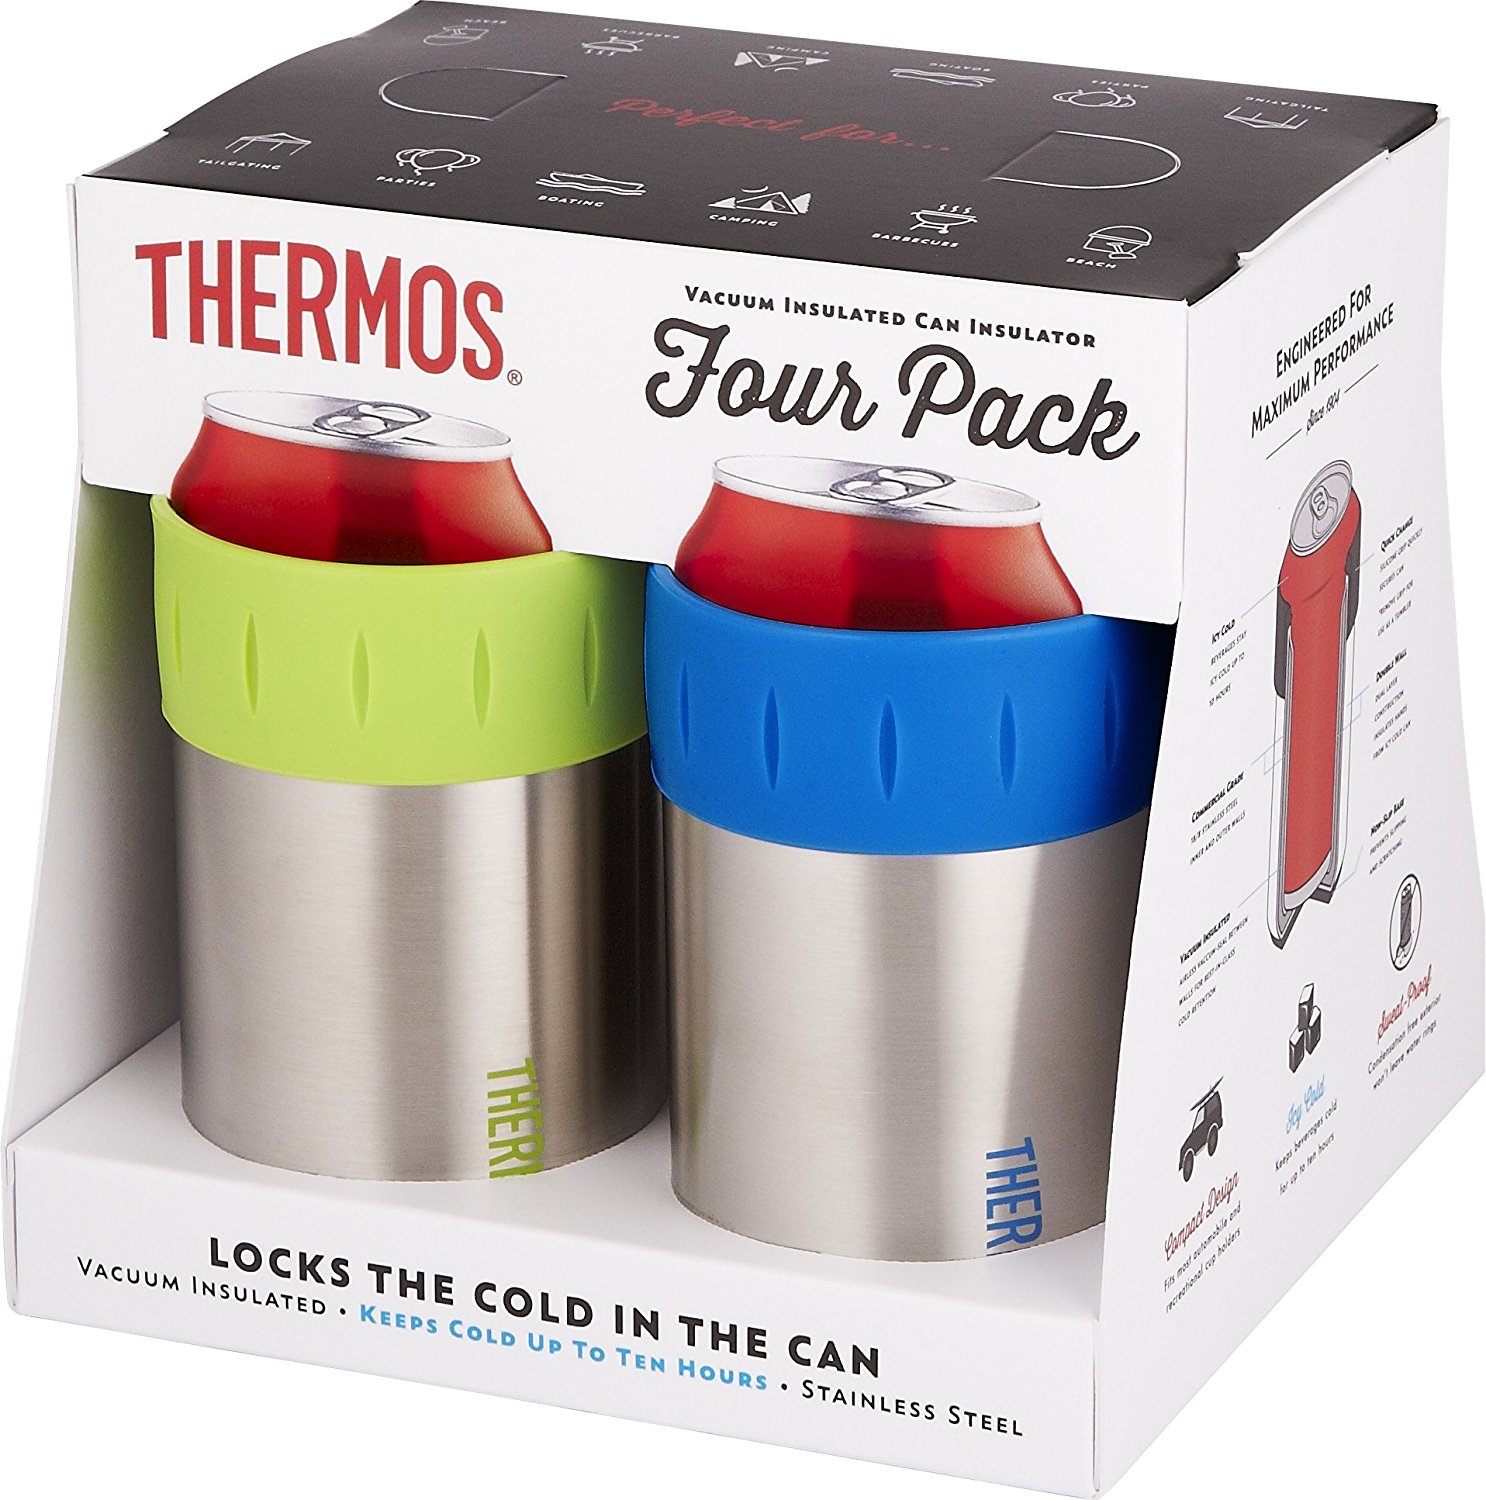 Thermos Stainless Vacuum Insulated 12 oz Can Insulator (Set of 4), Multicolor